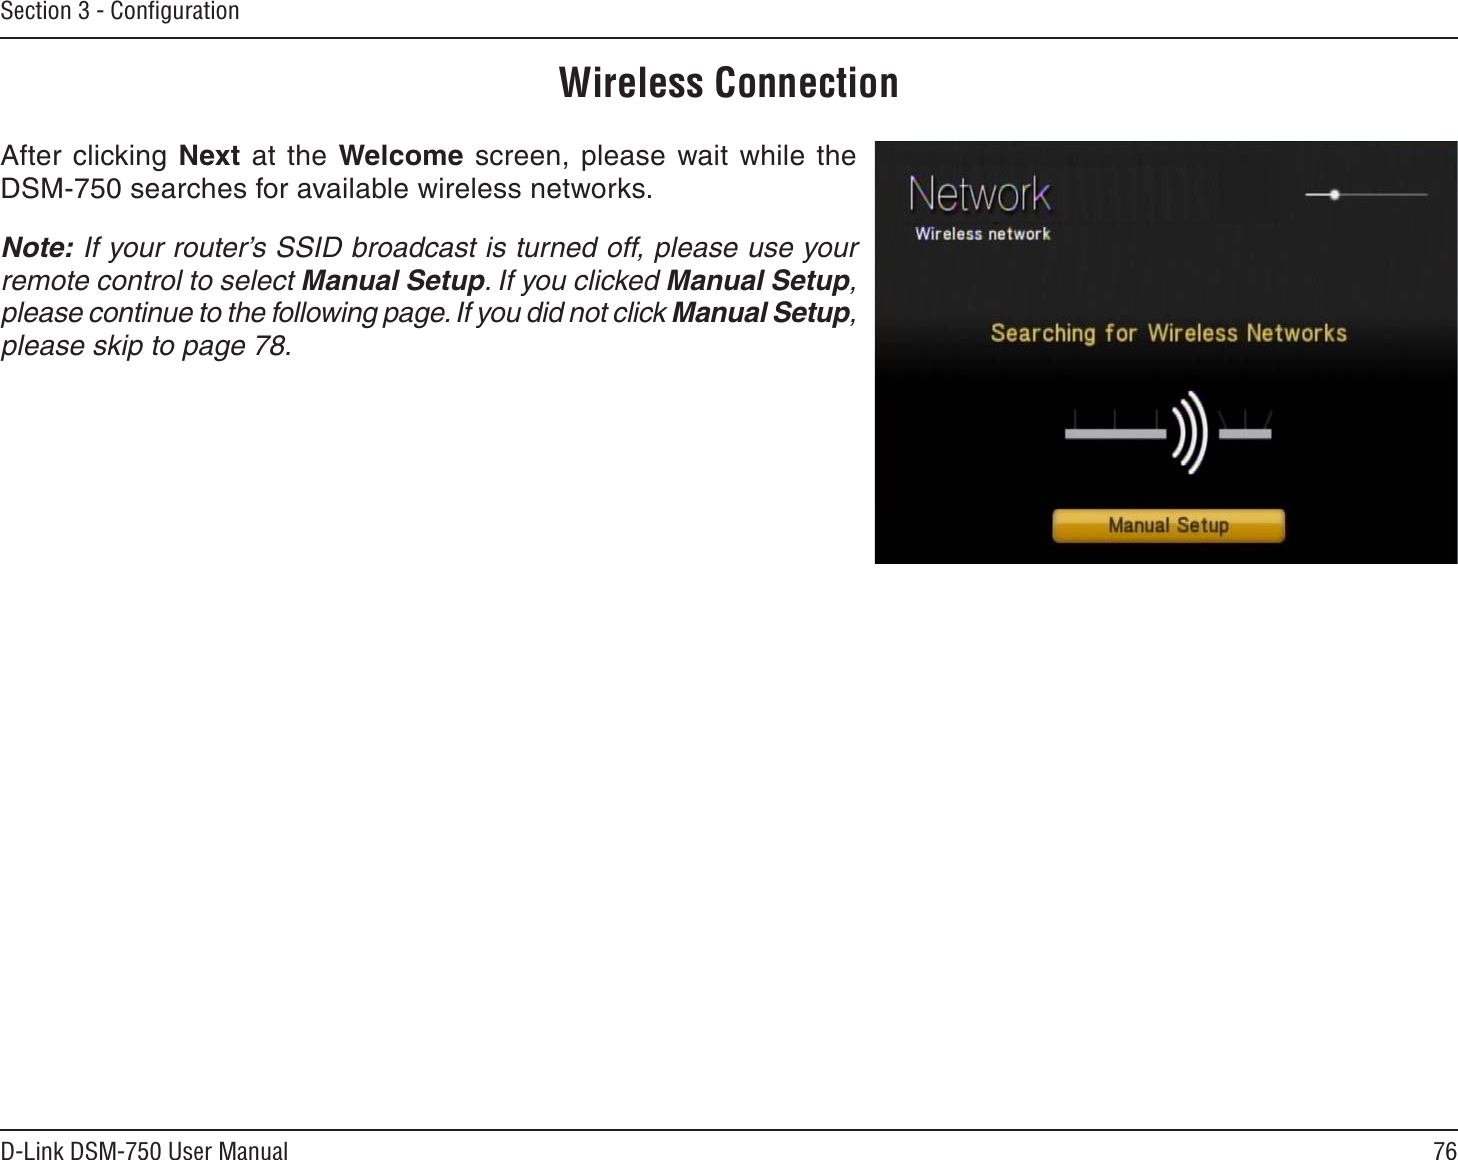 76D-Link DSM-750 User ManualSection 3 - ConﬁgurationWireless ConnectionAfter clicking Next at the Welcome screen, please wait while the DSM-750 searches for available wireless networks.Note: If your router’s SSID broadcast is turned off, please use your remote control to select Manual Setup. If you clicked Manual Setup,please continue to the following page. If you did not click Manual Setup,please skip to page 78.